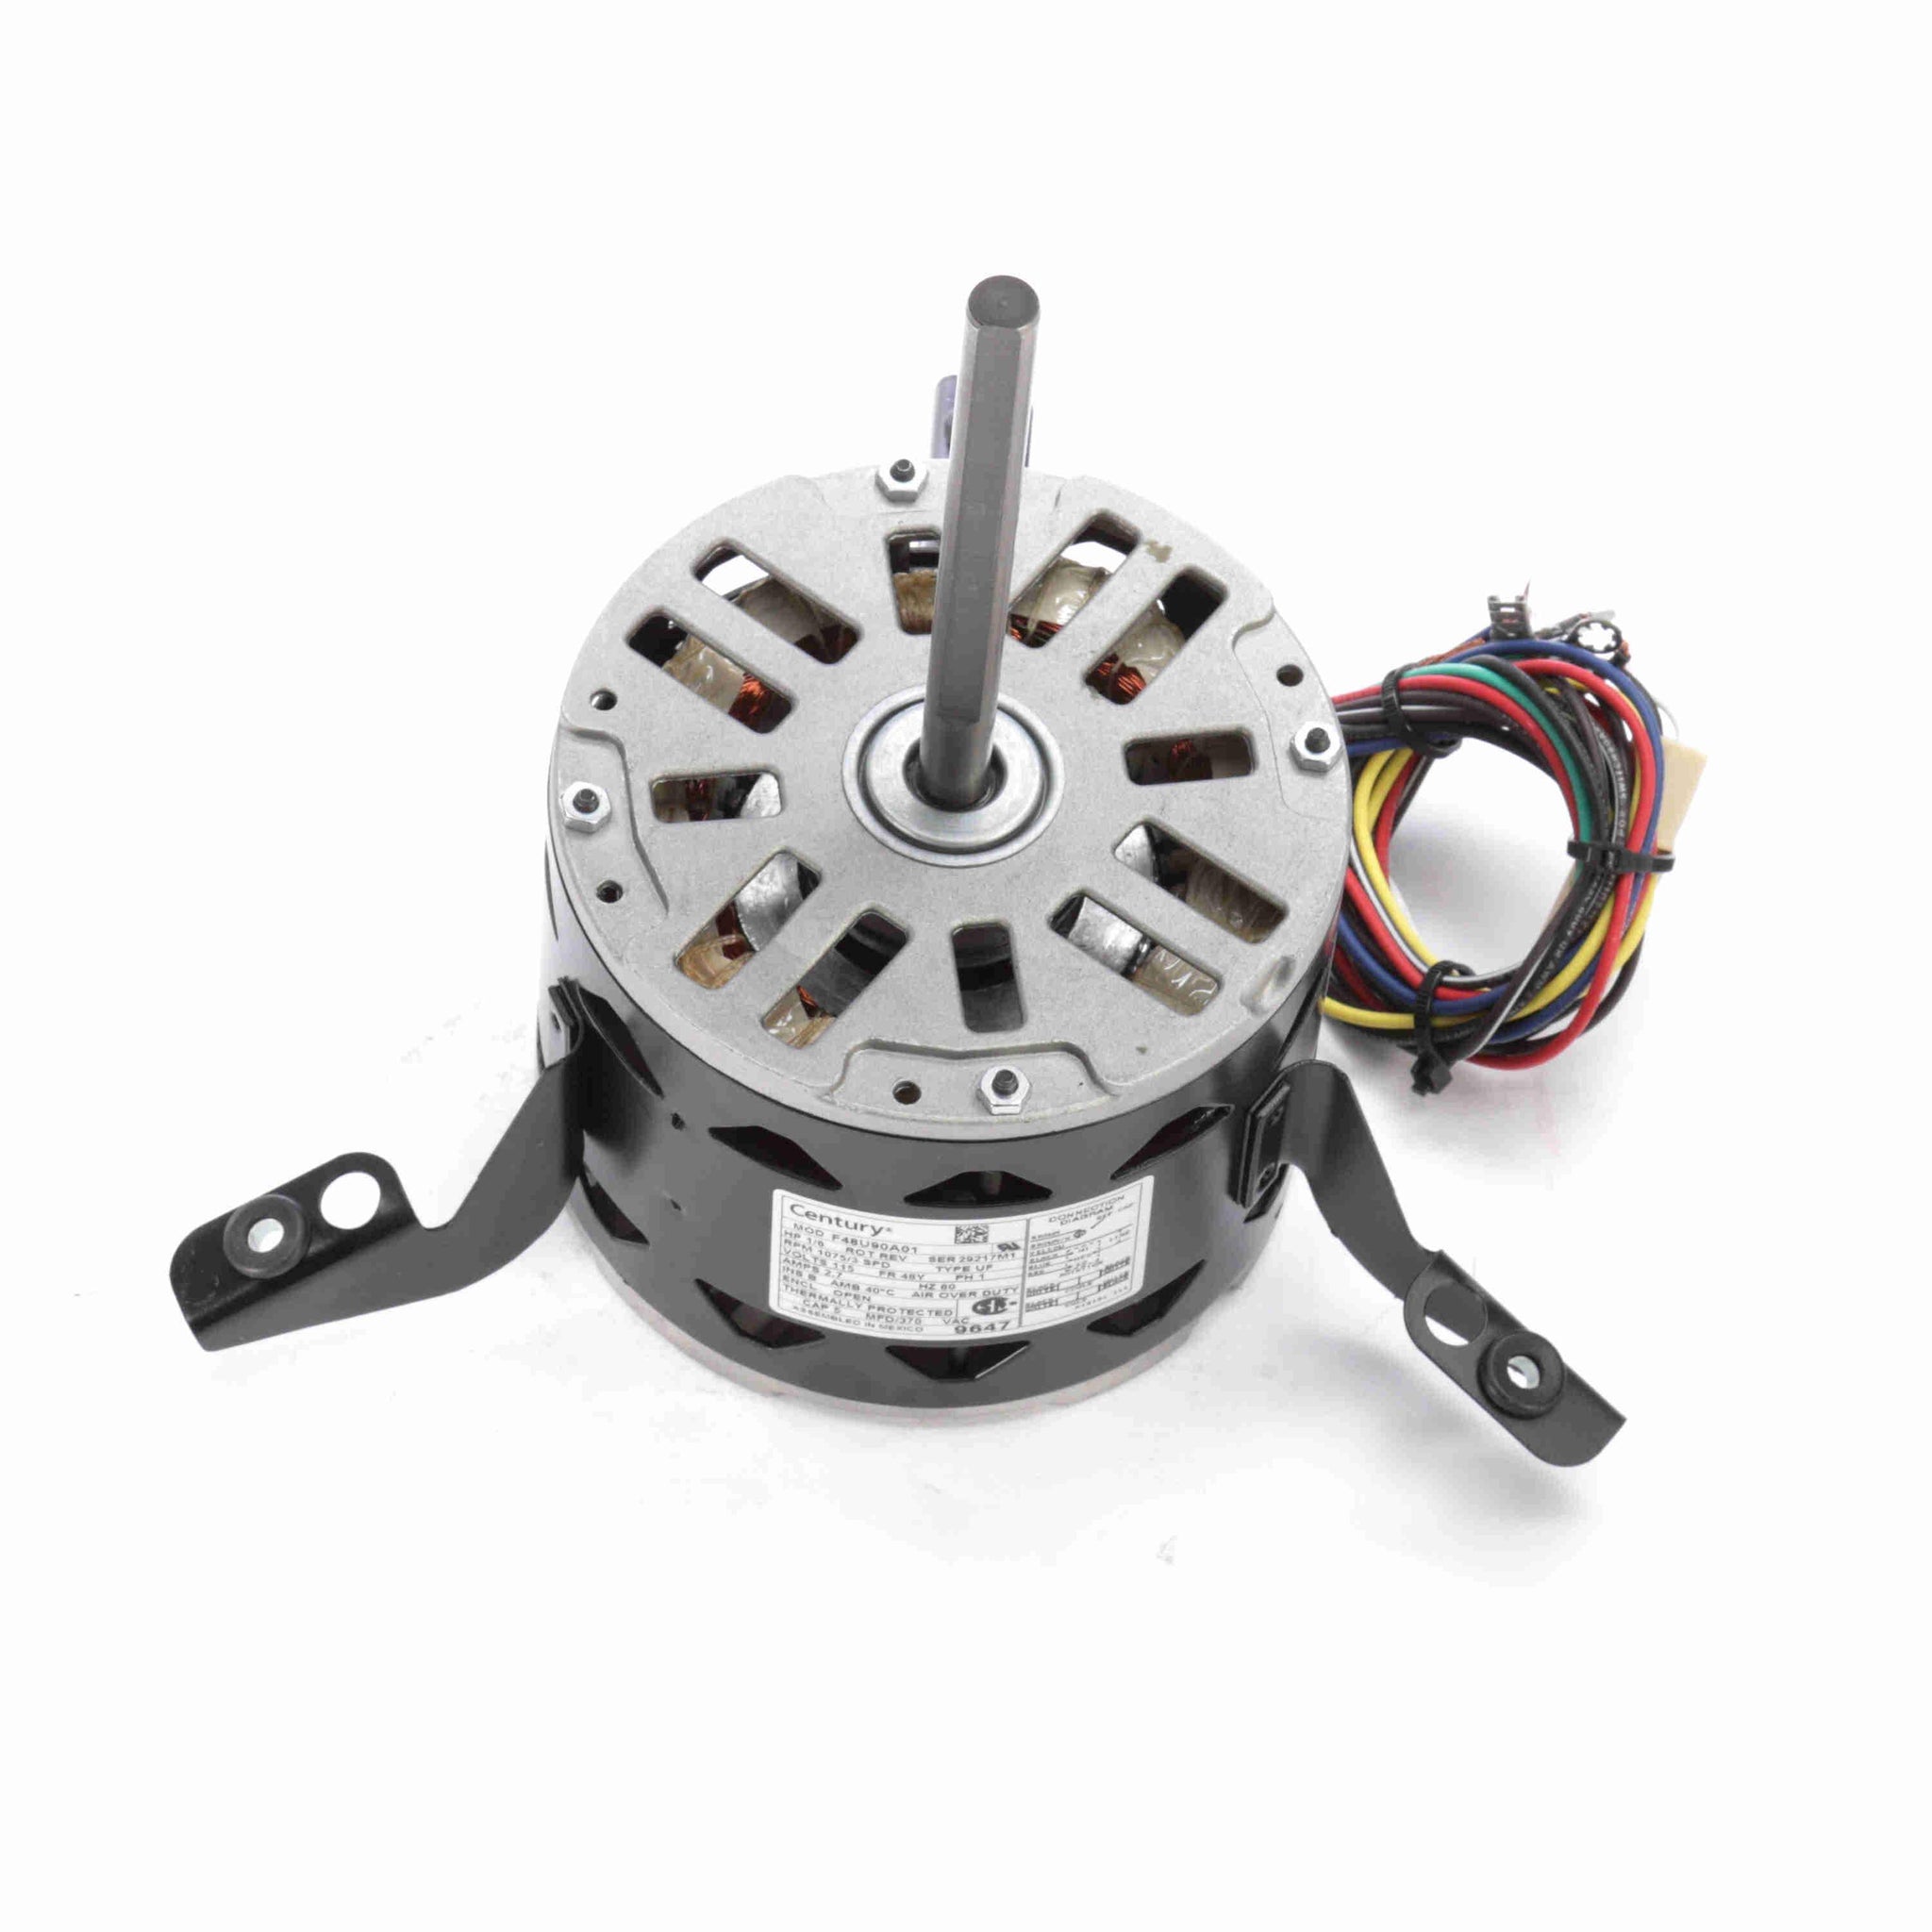 9647 -  1/6 HP Fan Coil / Room Air Conditioner Motor, 1075 RPM, 3 Speed, 115 Volts, 48 Frame, OAO - Hardware & Moreee